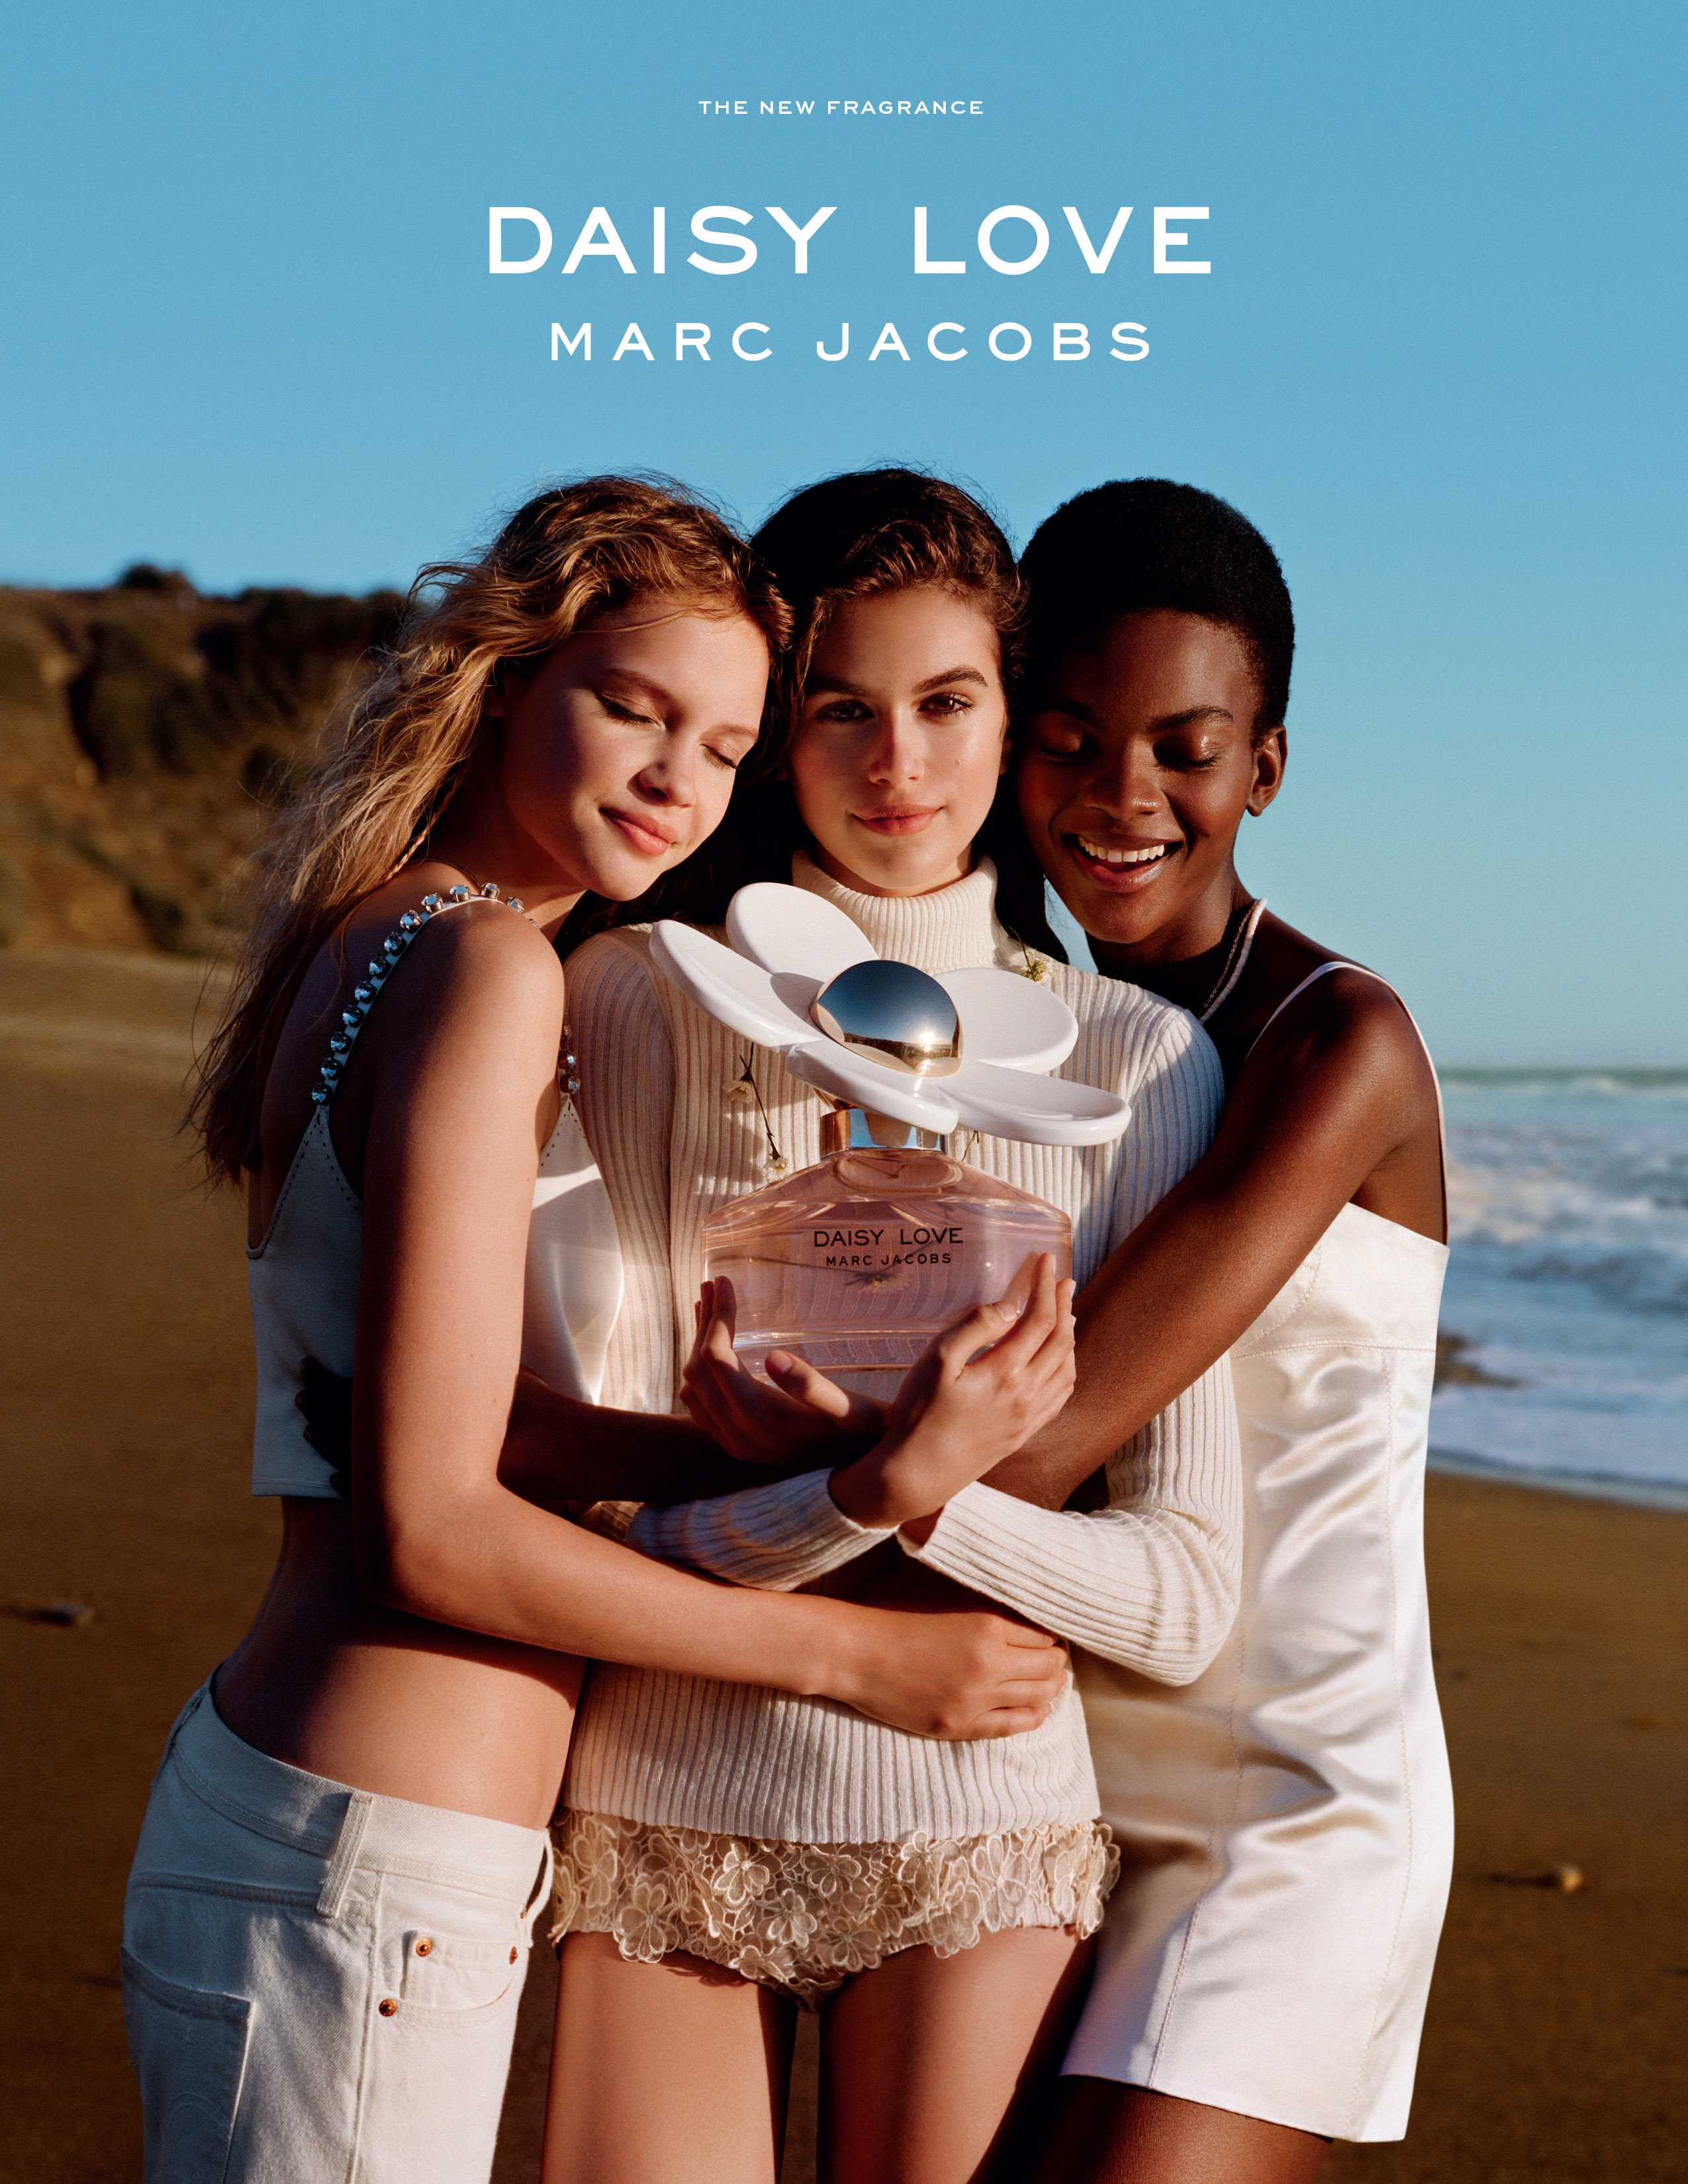 Marc Jacobs Fragrances Introduces New Women's Fragrance “Daisy Love Marc  Jacobs” and Global Campaign Featuring Internationally-Acclaimed Model Kaia  Gerber